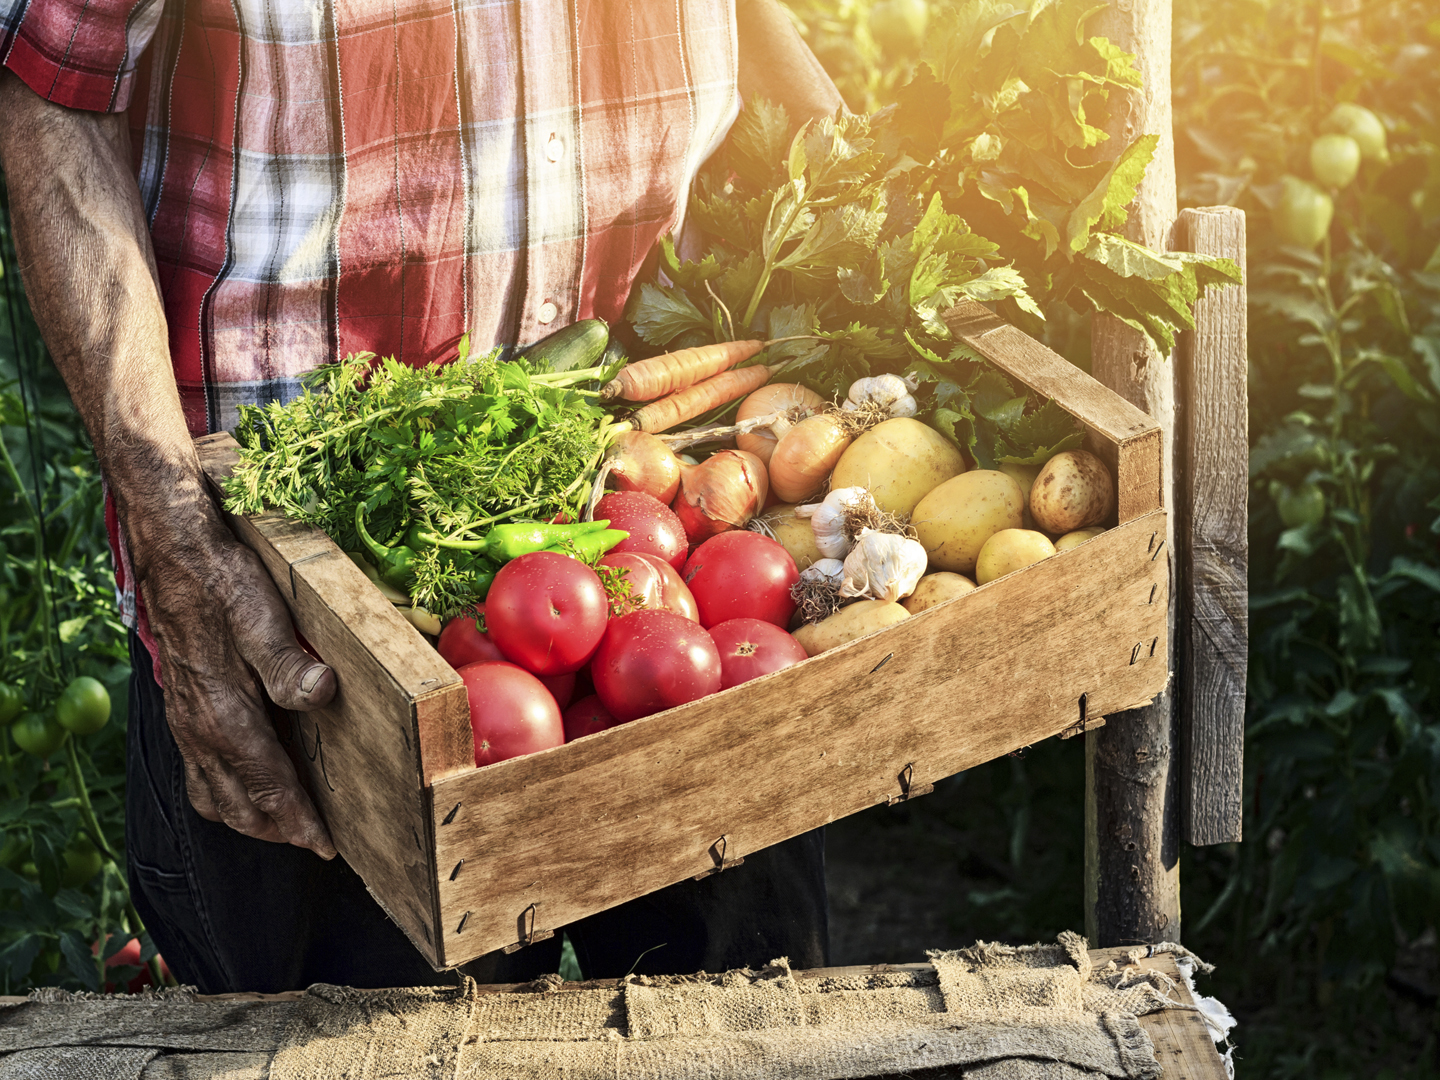 Old man holding wooden crate filled with fresh vegetables - tomatoes, carrots, garlic and potatoes.